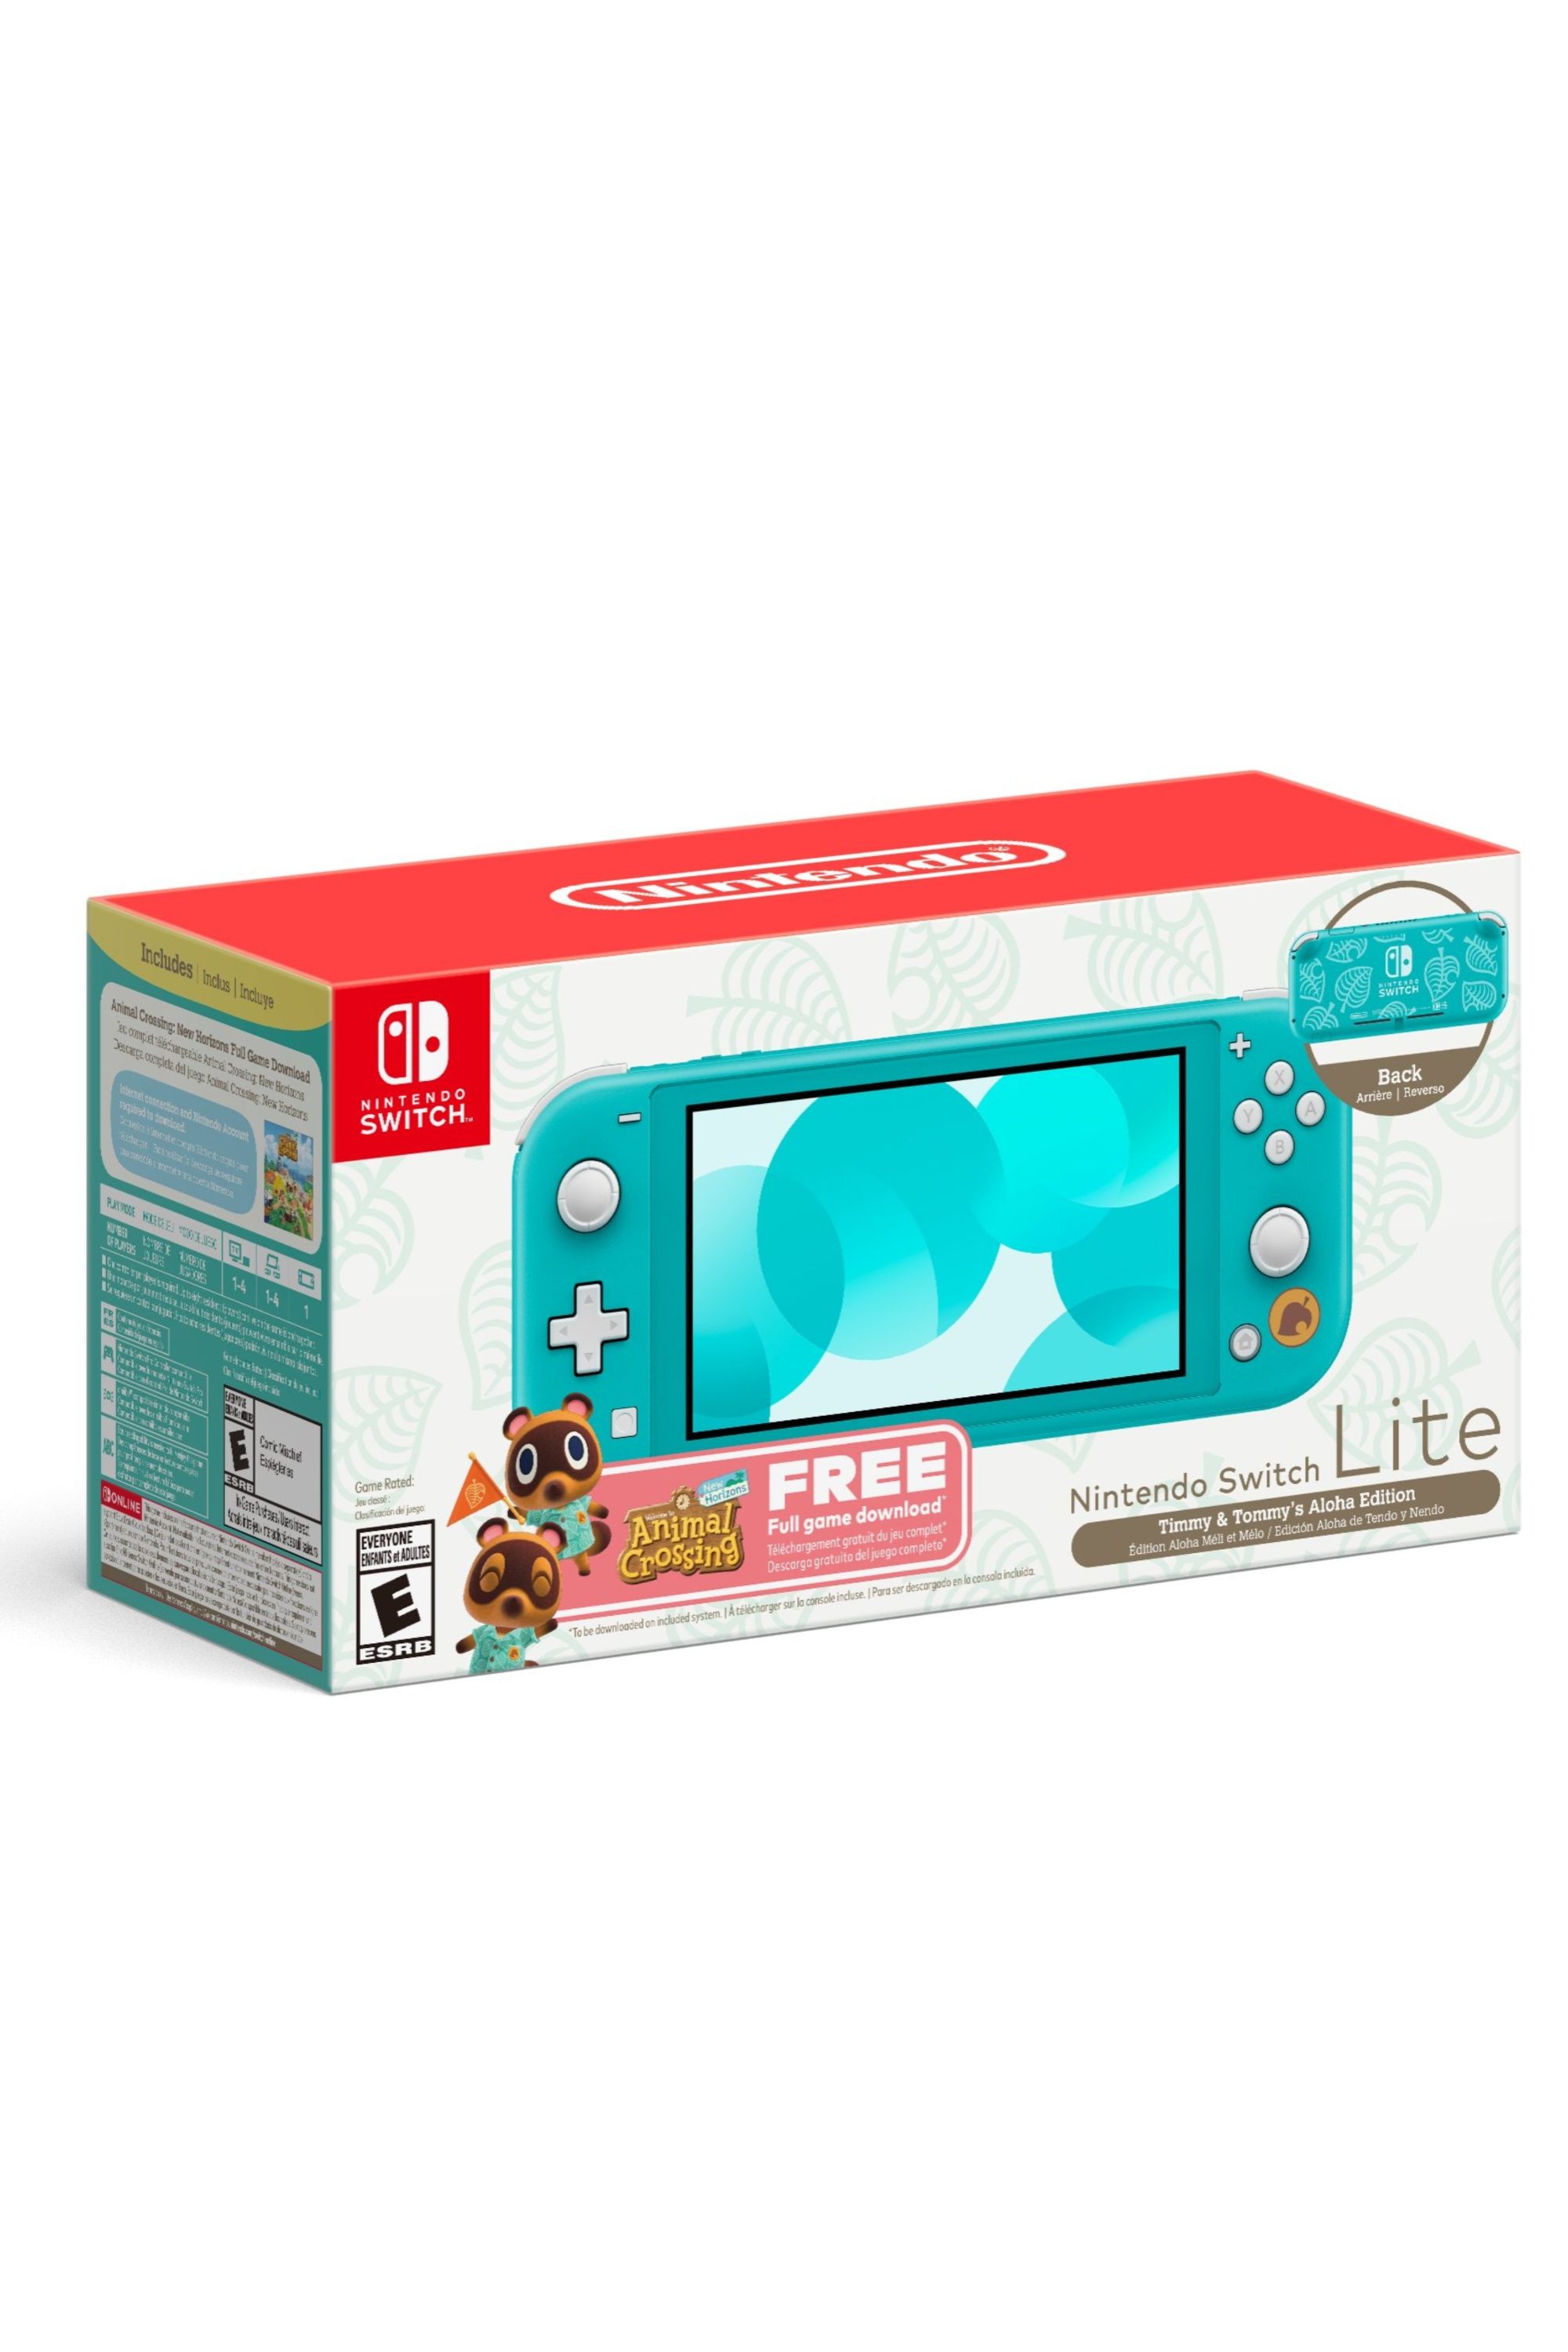 timmy and tommy's teal nintendo switch lite in a box